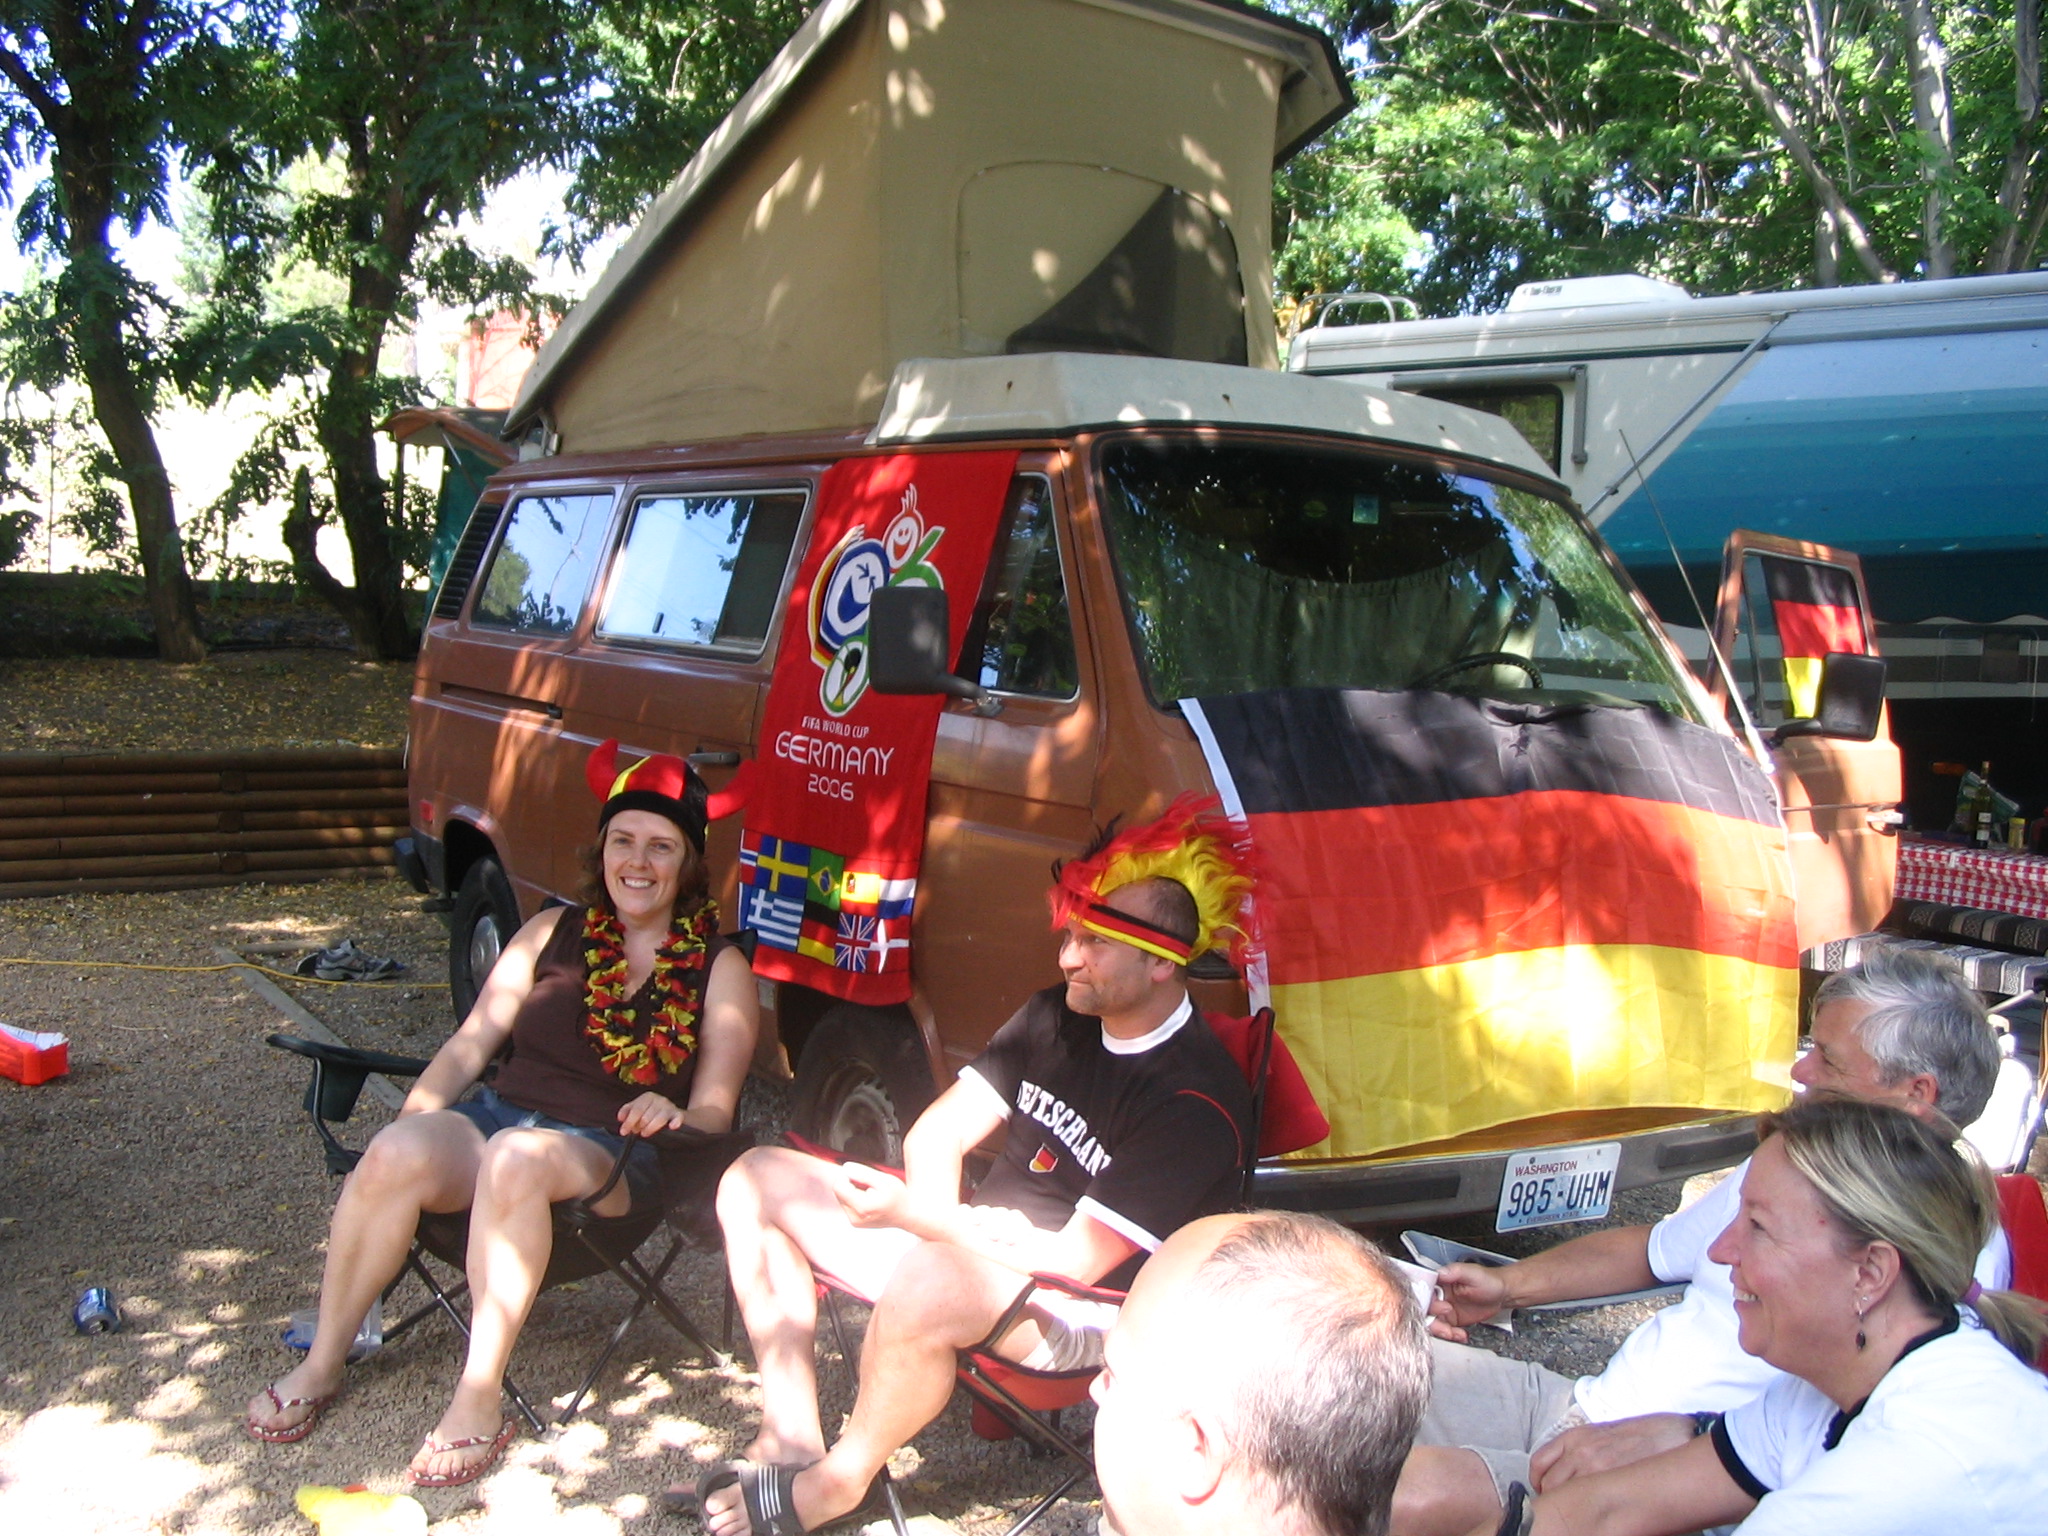 World Cup at the camp site